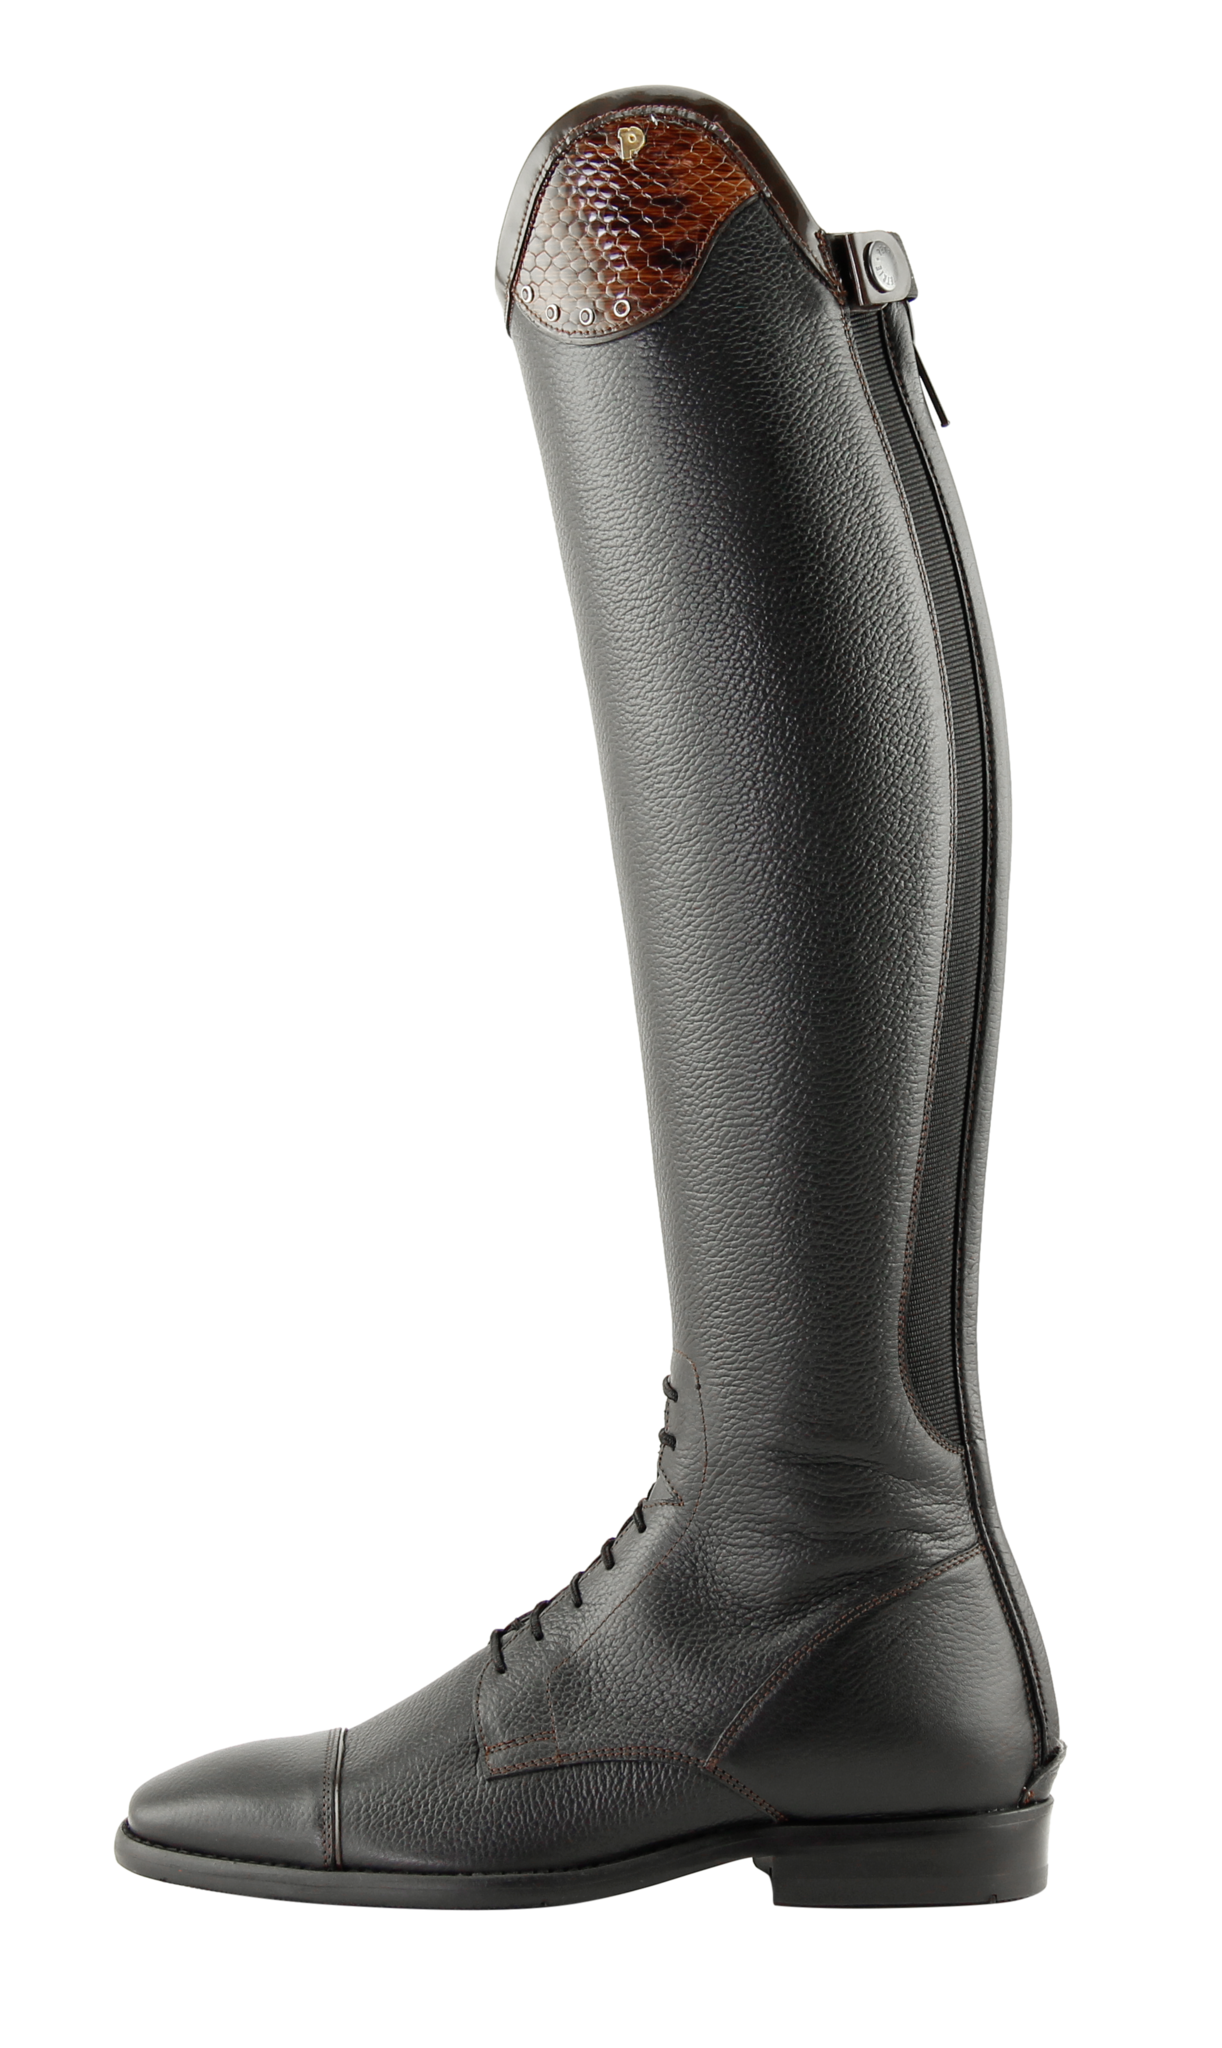 Petrie Luca Riding Boots Boots Petrie - Equestrian Fashion Outfitters